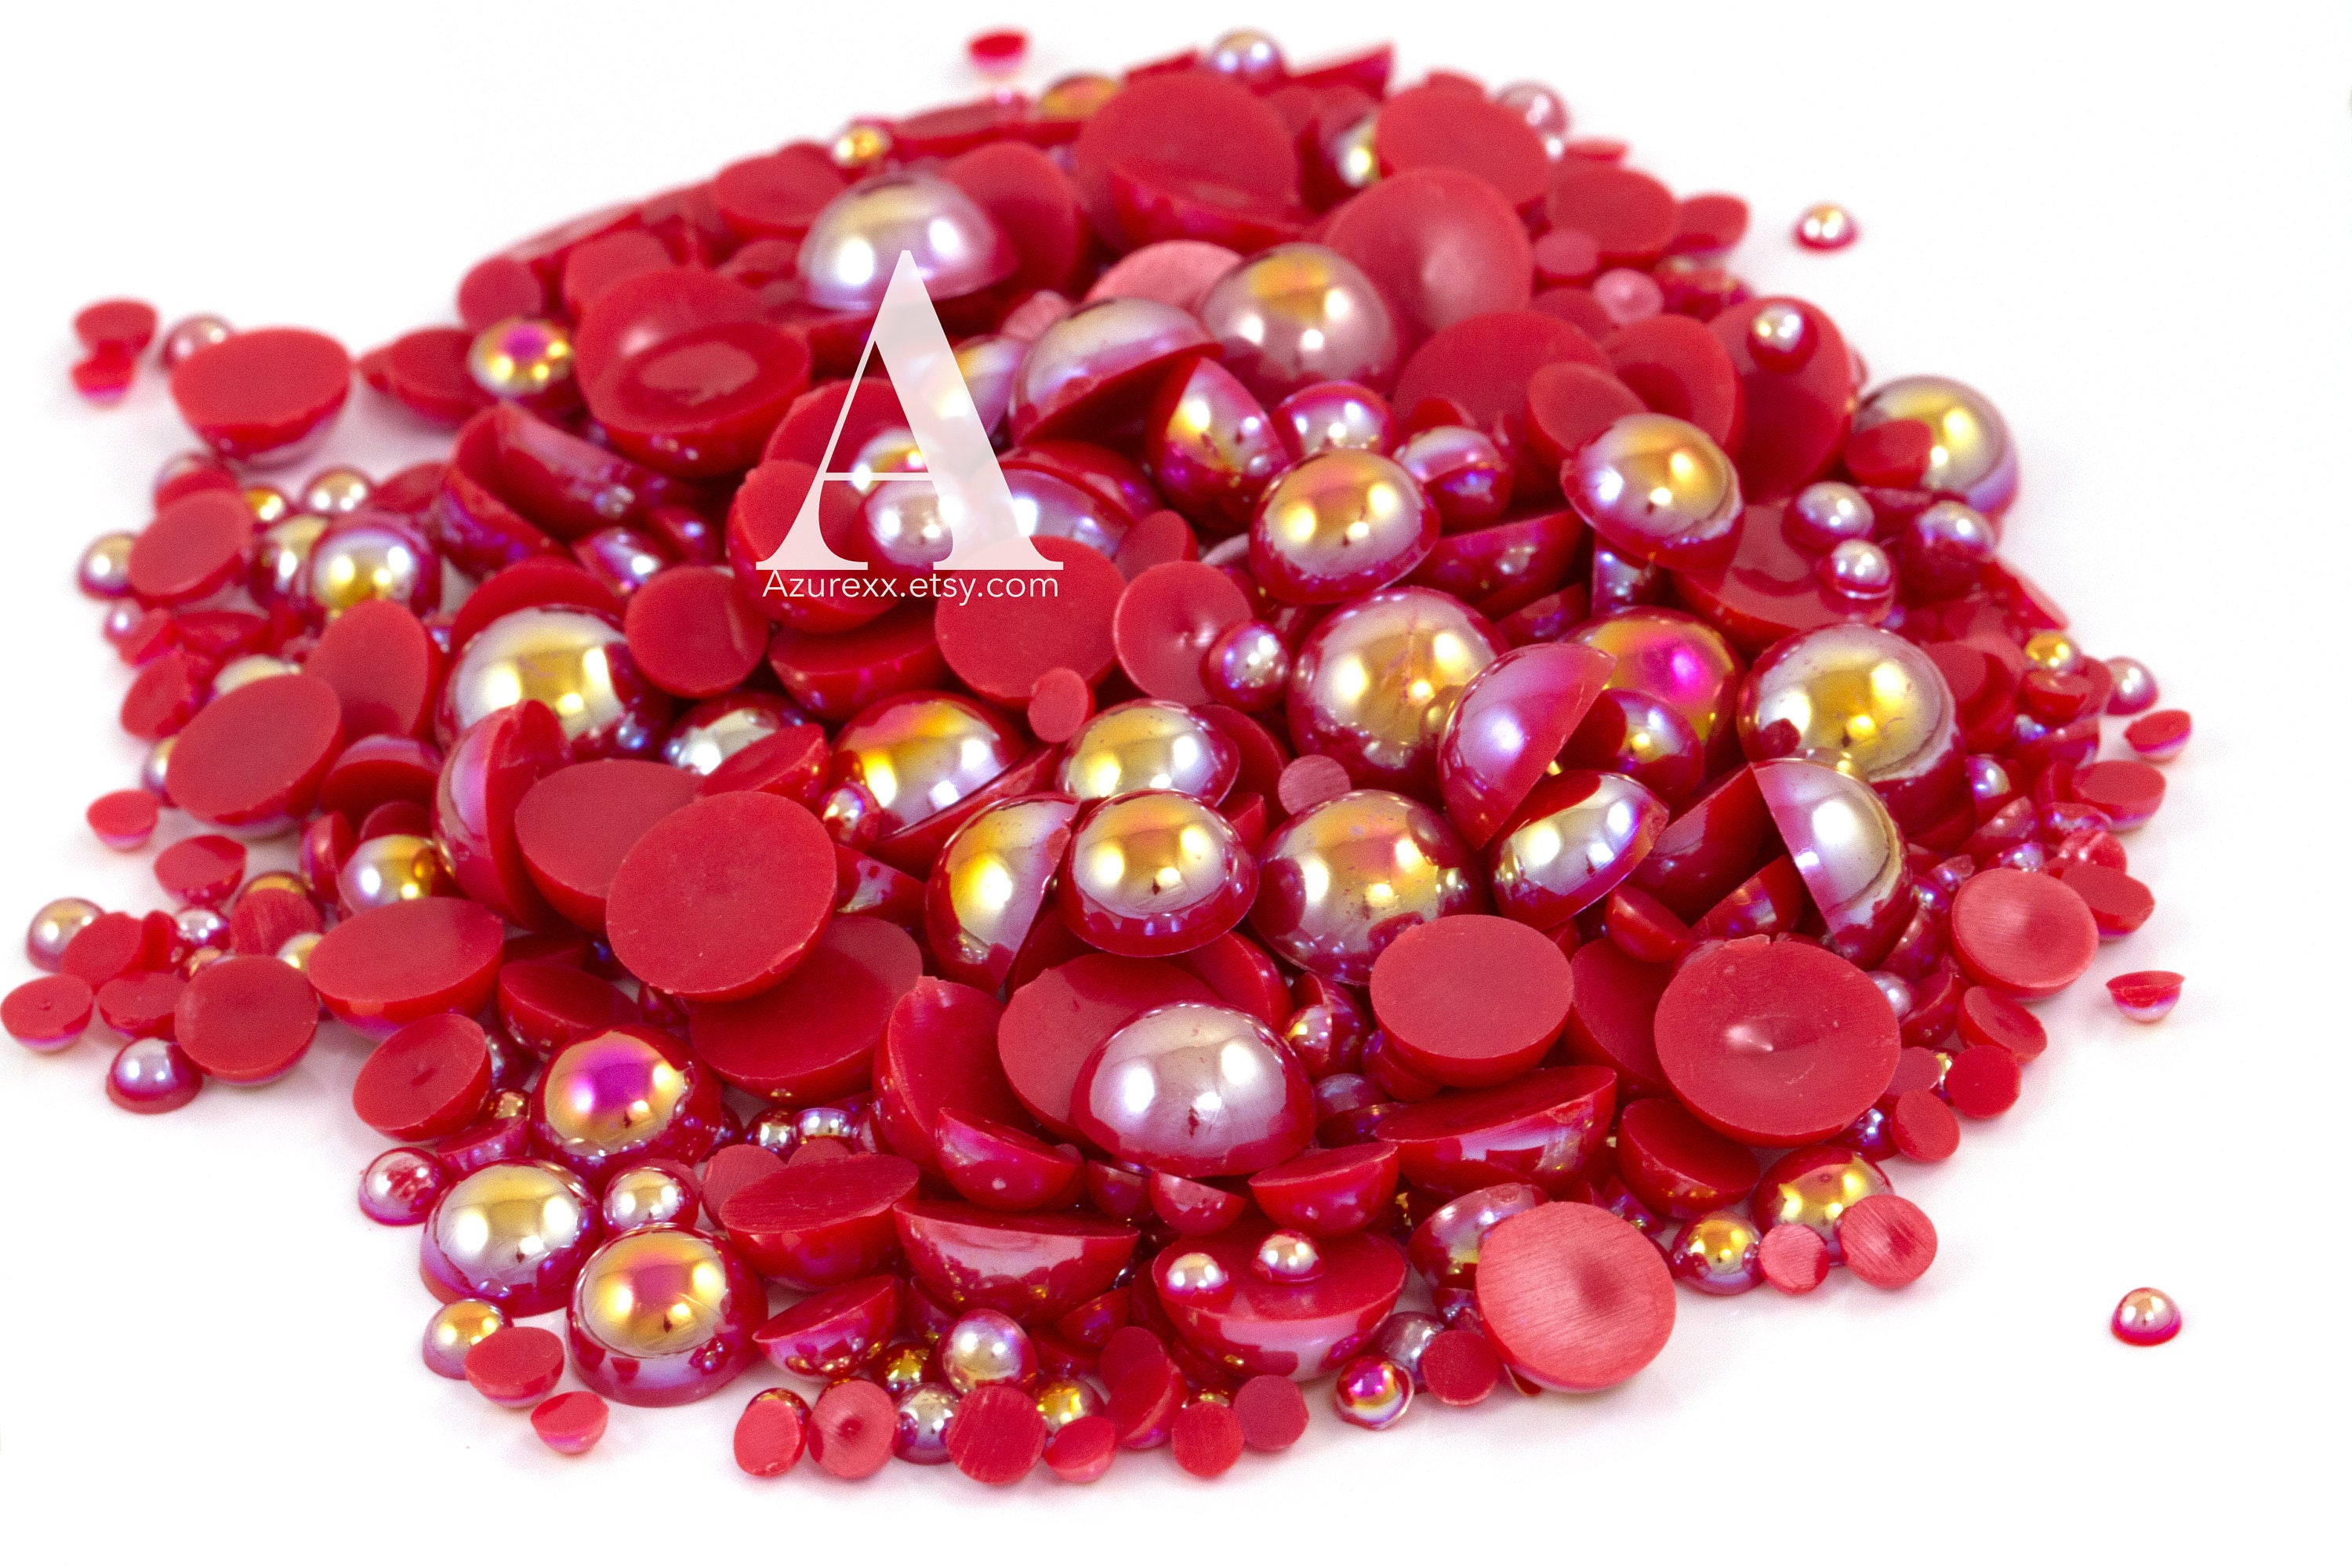 30 GRAMS RED Flatback Pearls and Assorted Flatback Resin